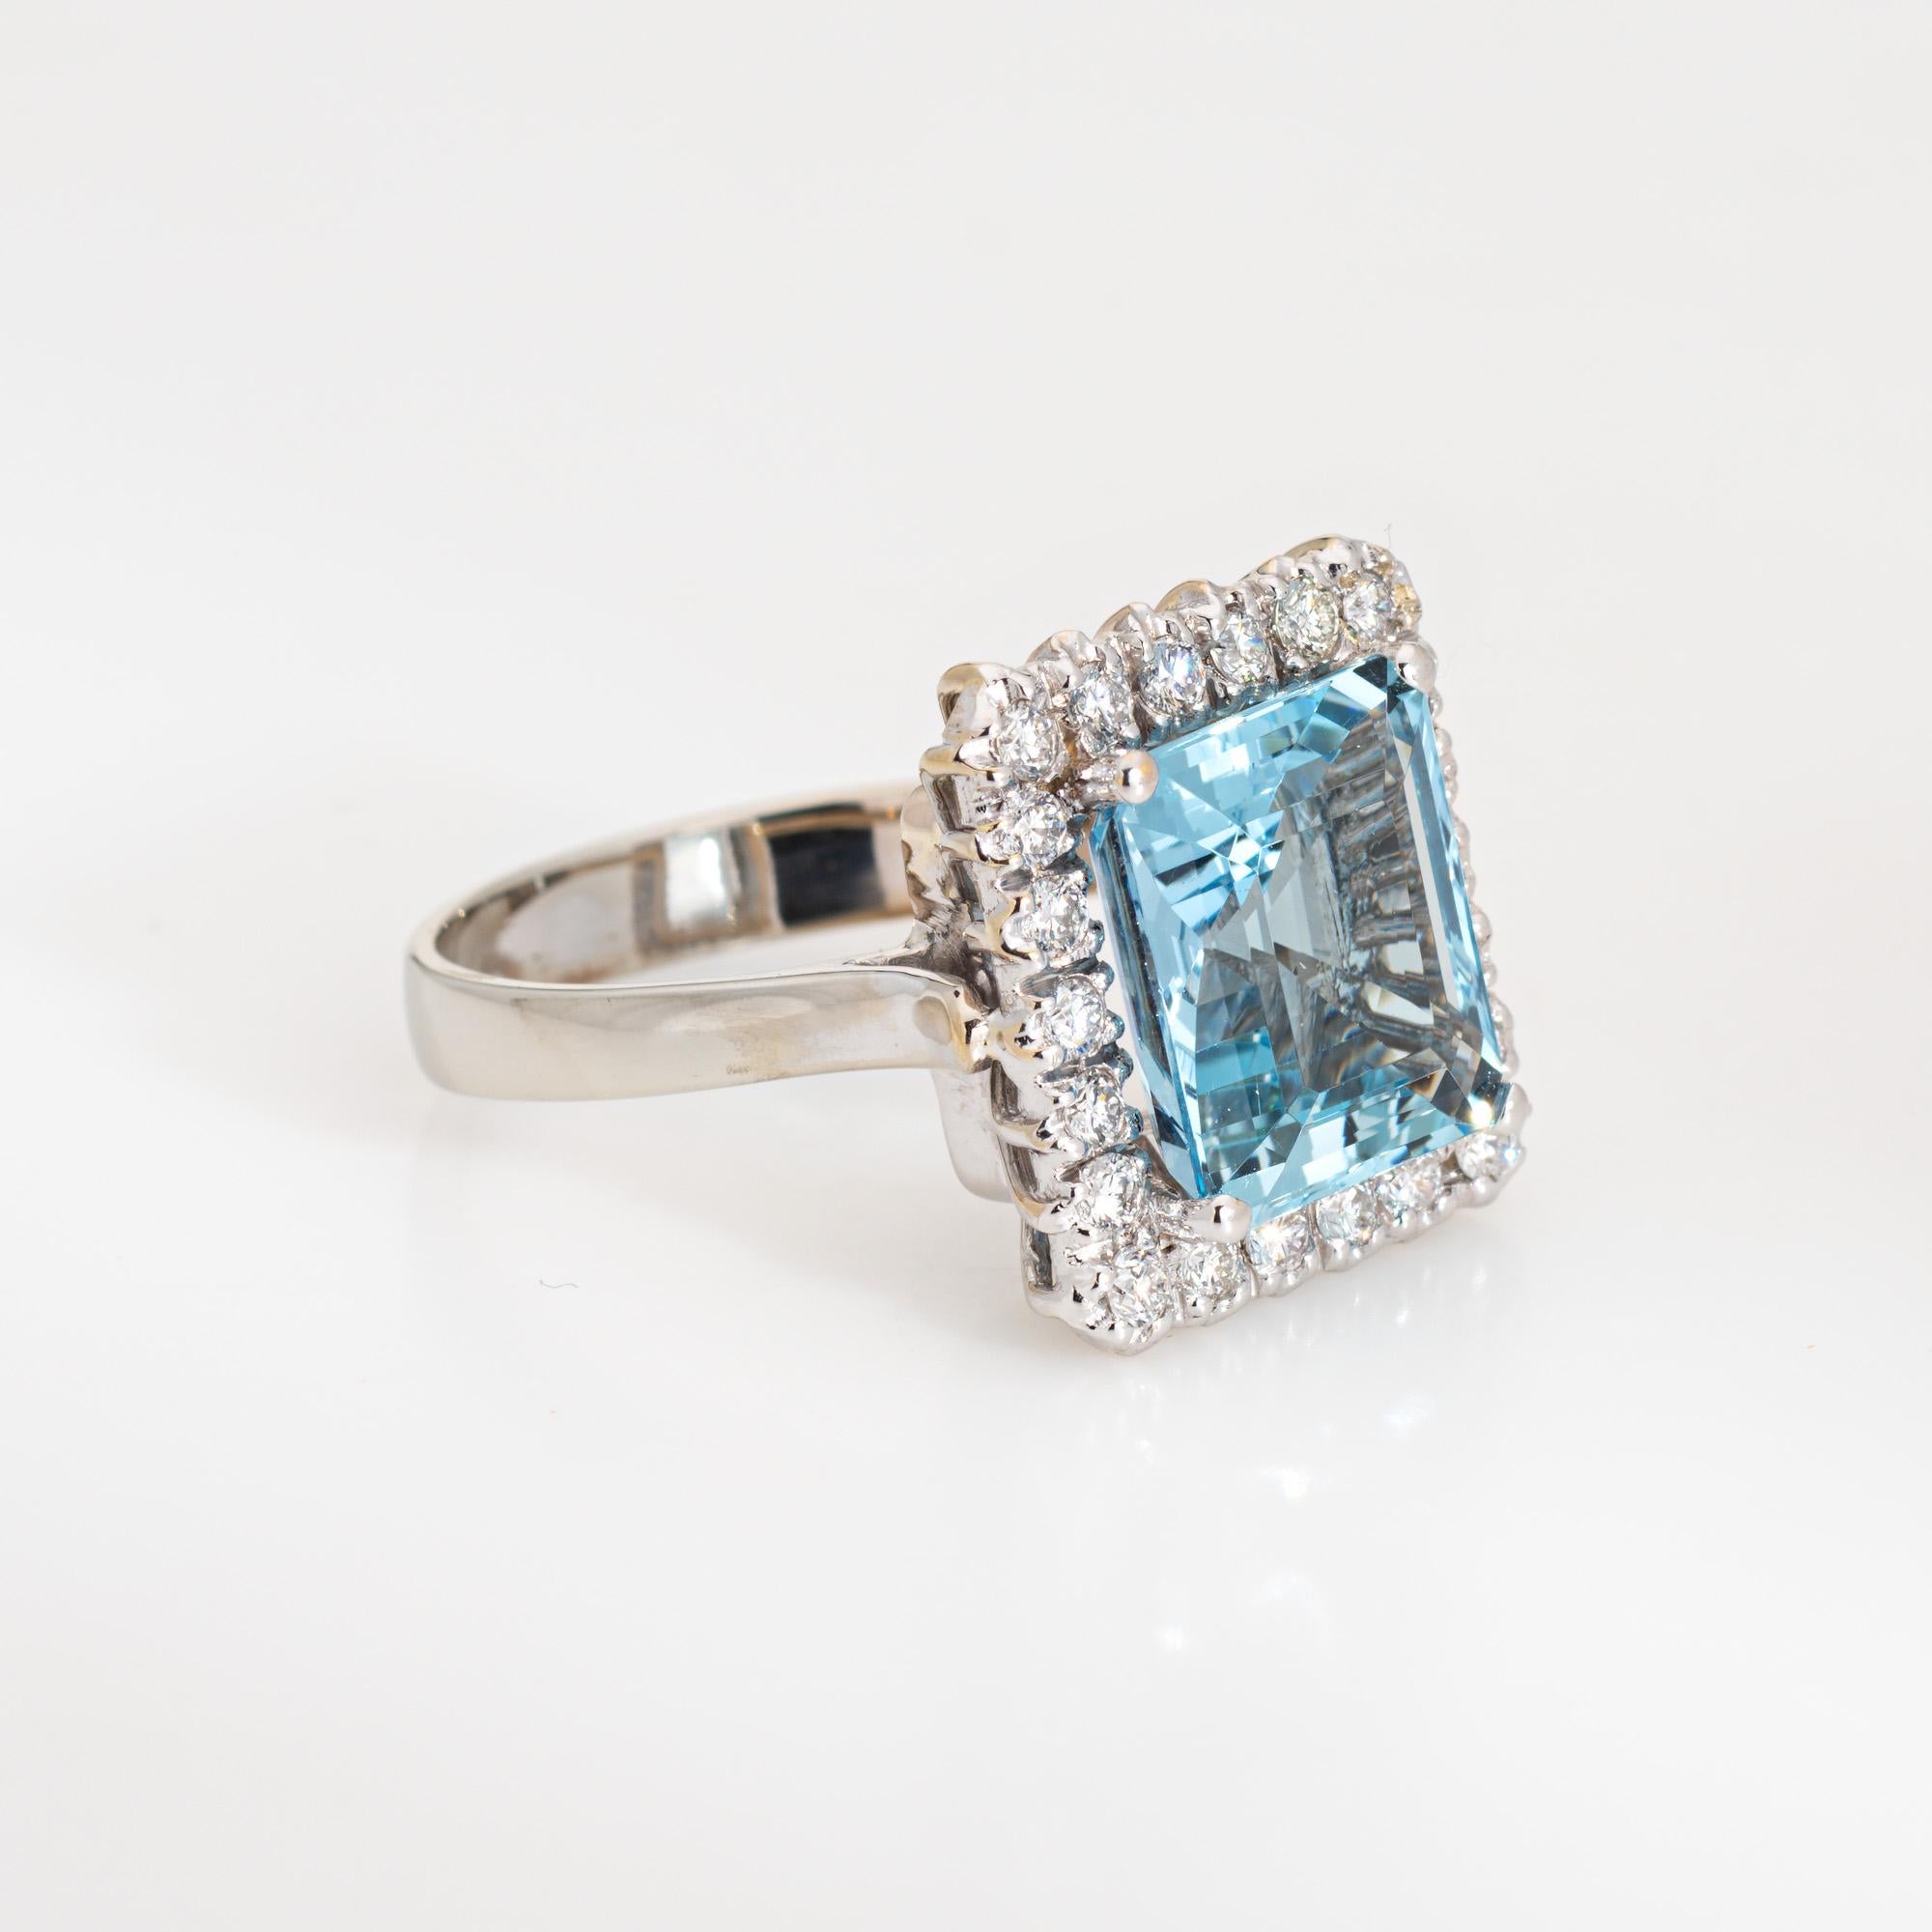 Modern 5.35ct Aquamarine Diamond Square Ring Vintage 18k White Gold Cocktail Jewelry For Sale